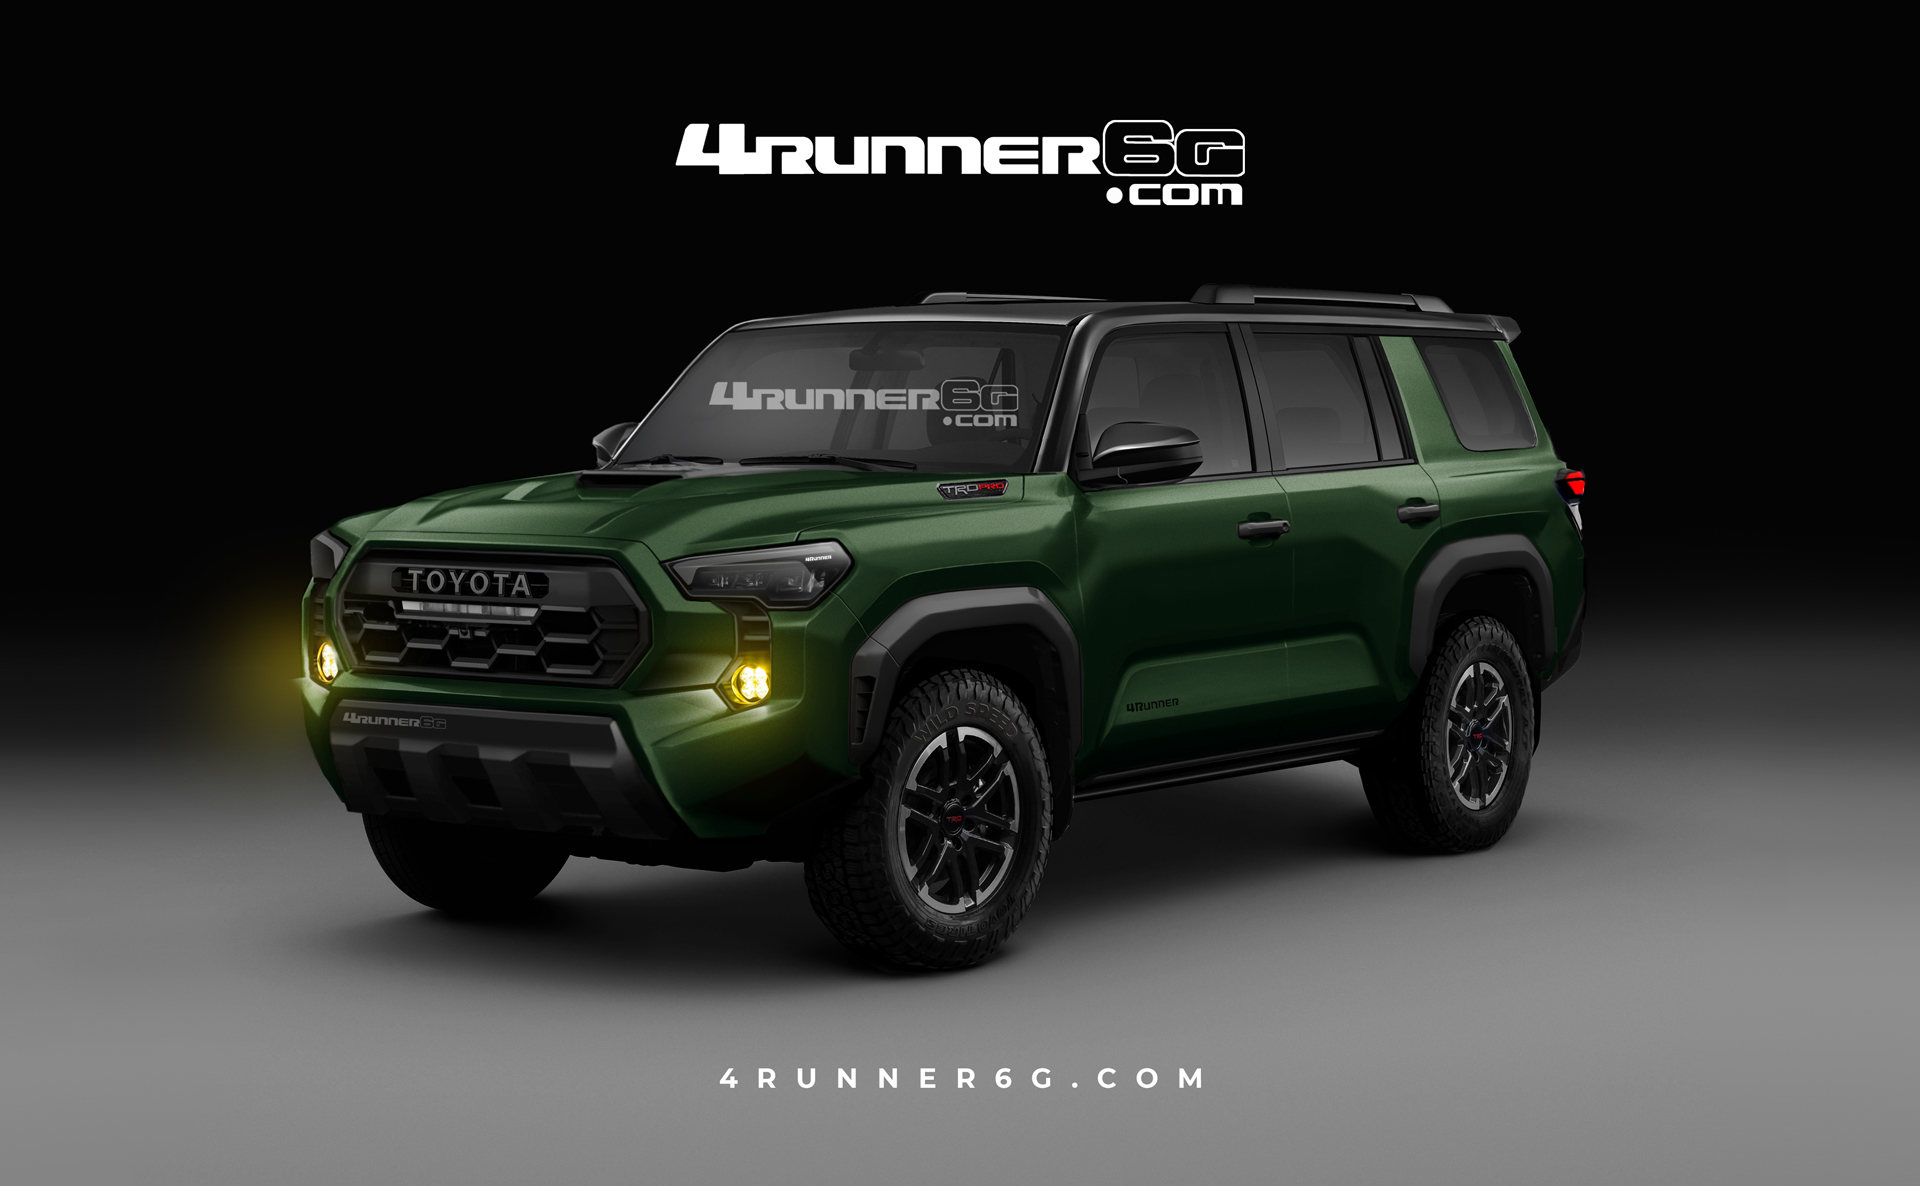 2025 Toyota 4runner 2025 4Runner (6th Gen) News, Specs, Engines, Release Date, Production Date & Preview Renderings -- Insider Info (as of 7/30/23) 2025 Toyota-4Runner-Front-S-Army-green